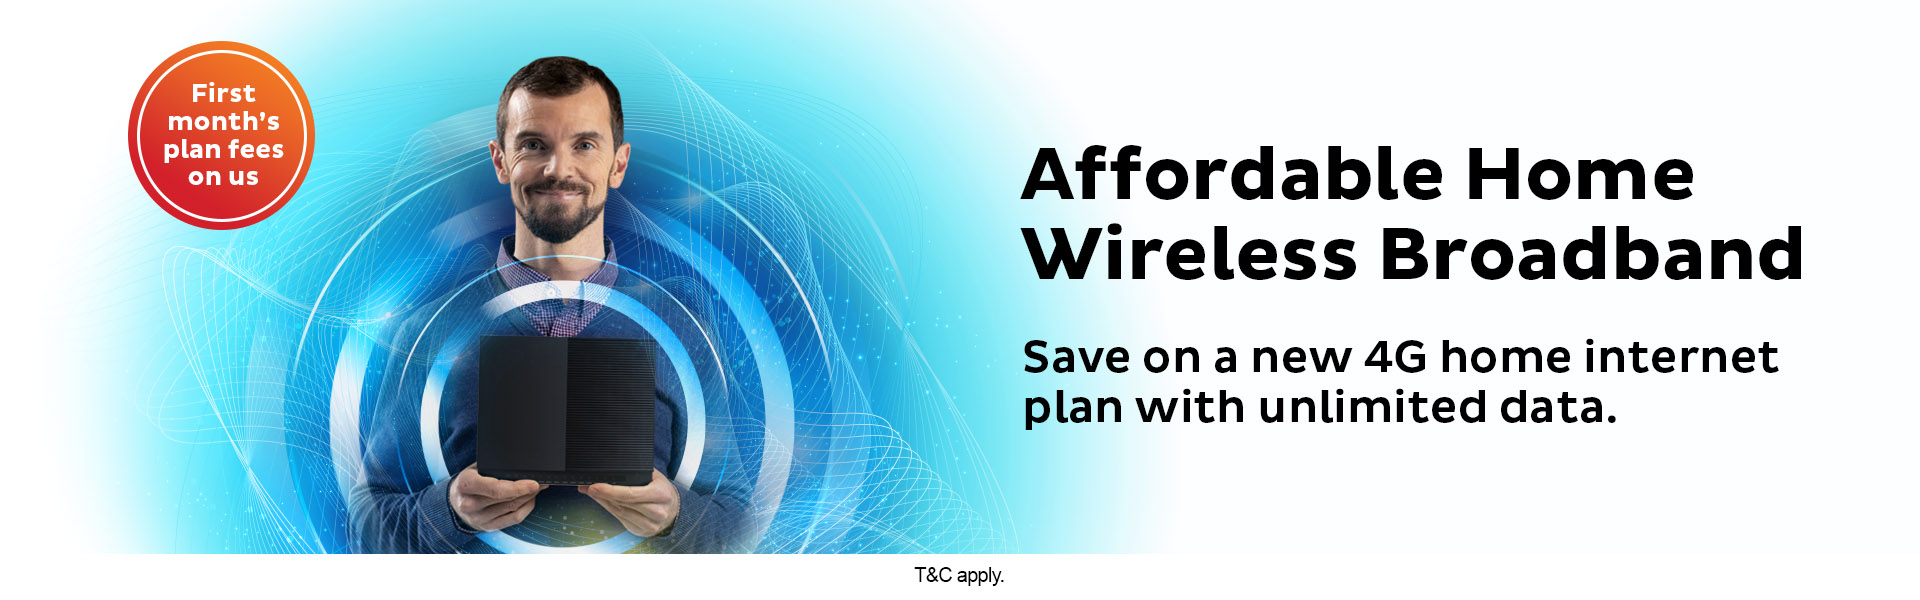 Affordable Home Wireless Broadband